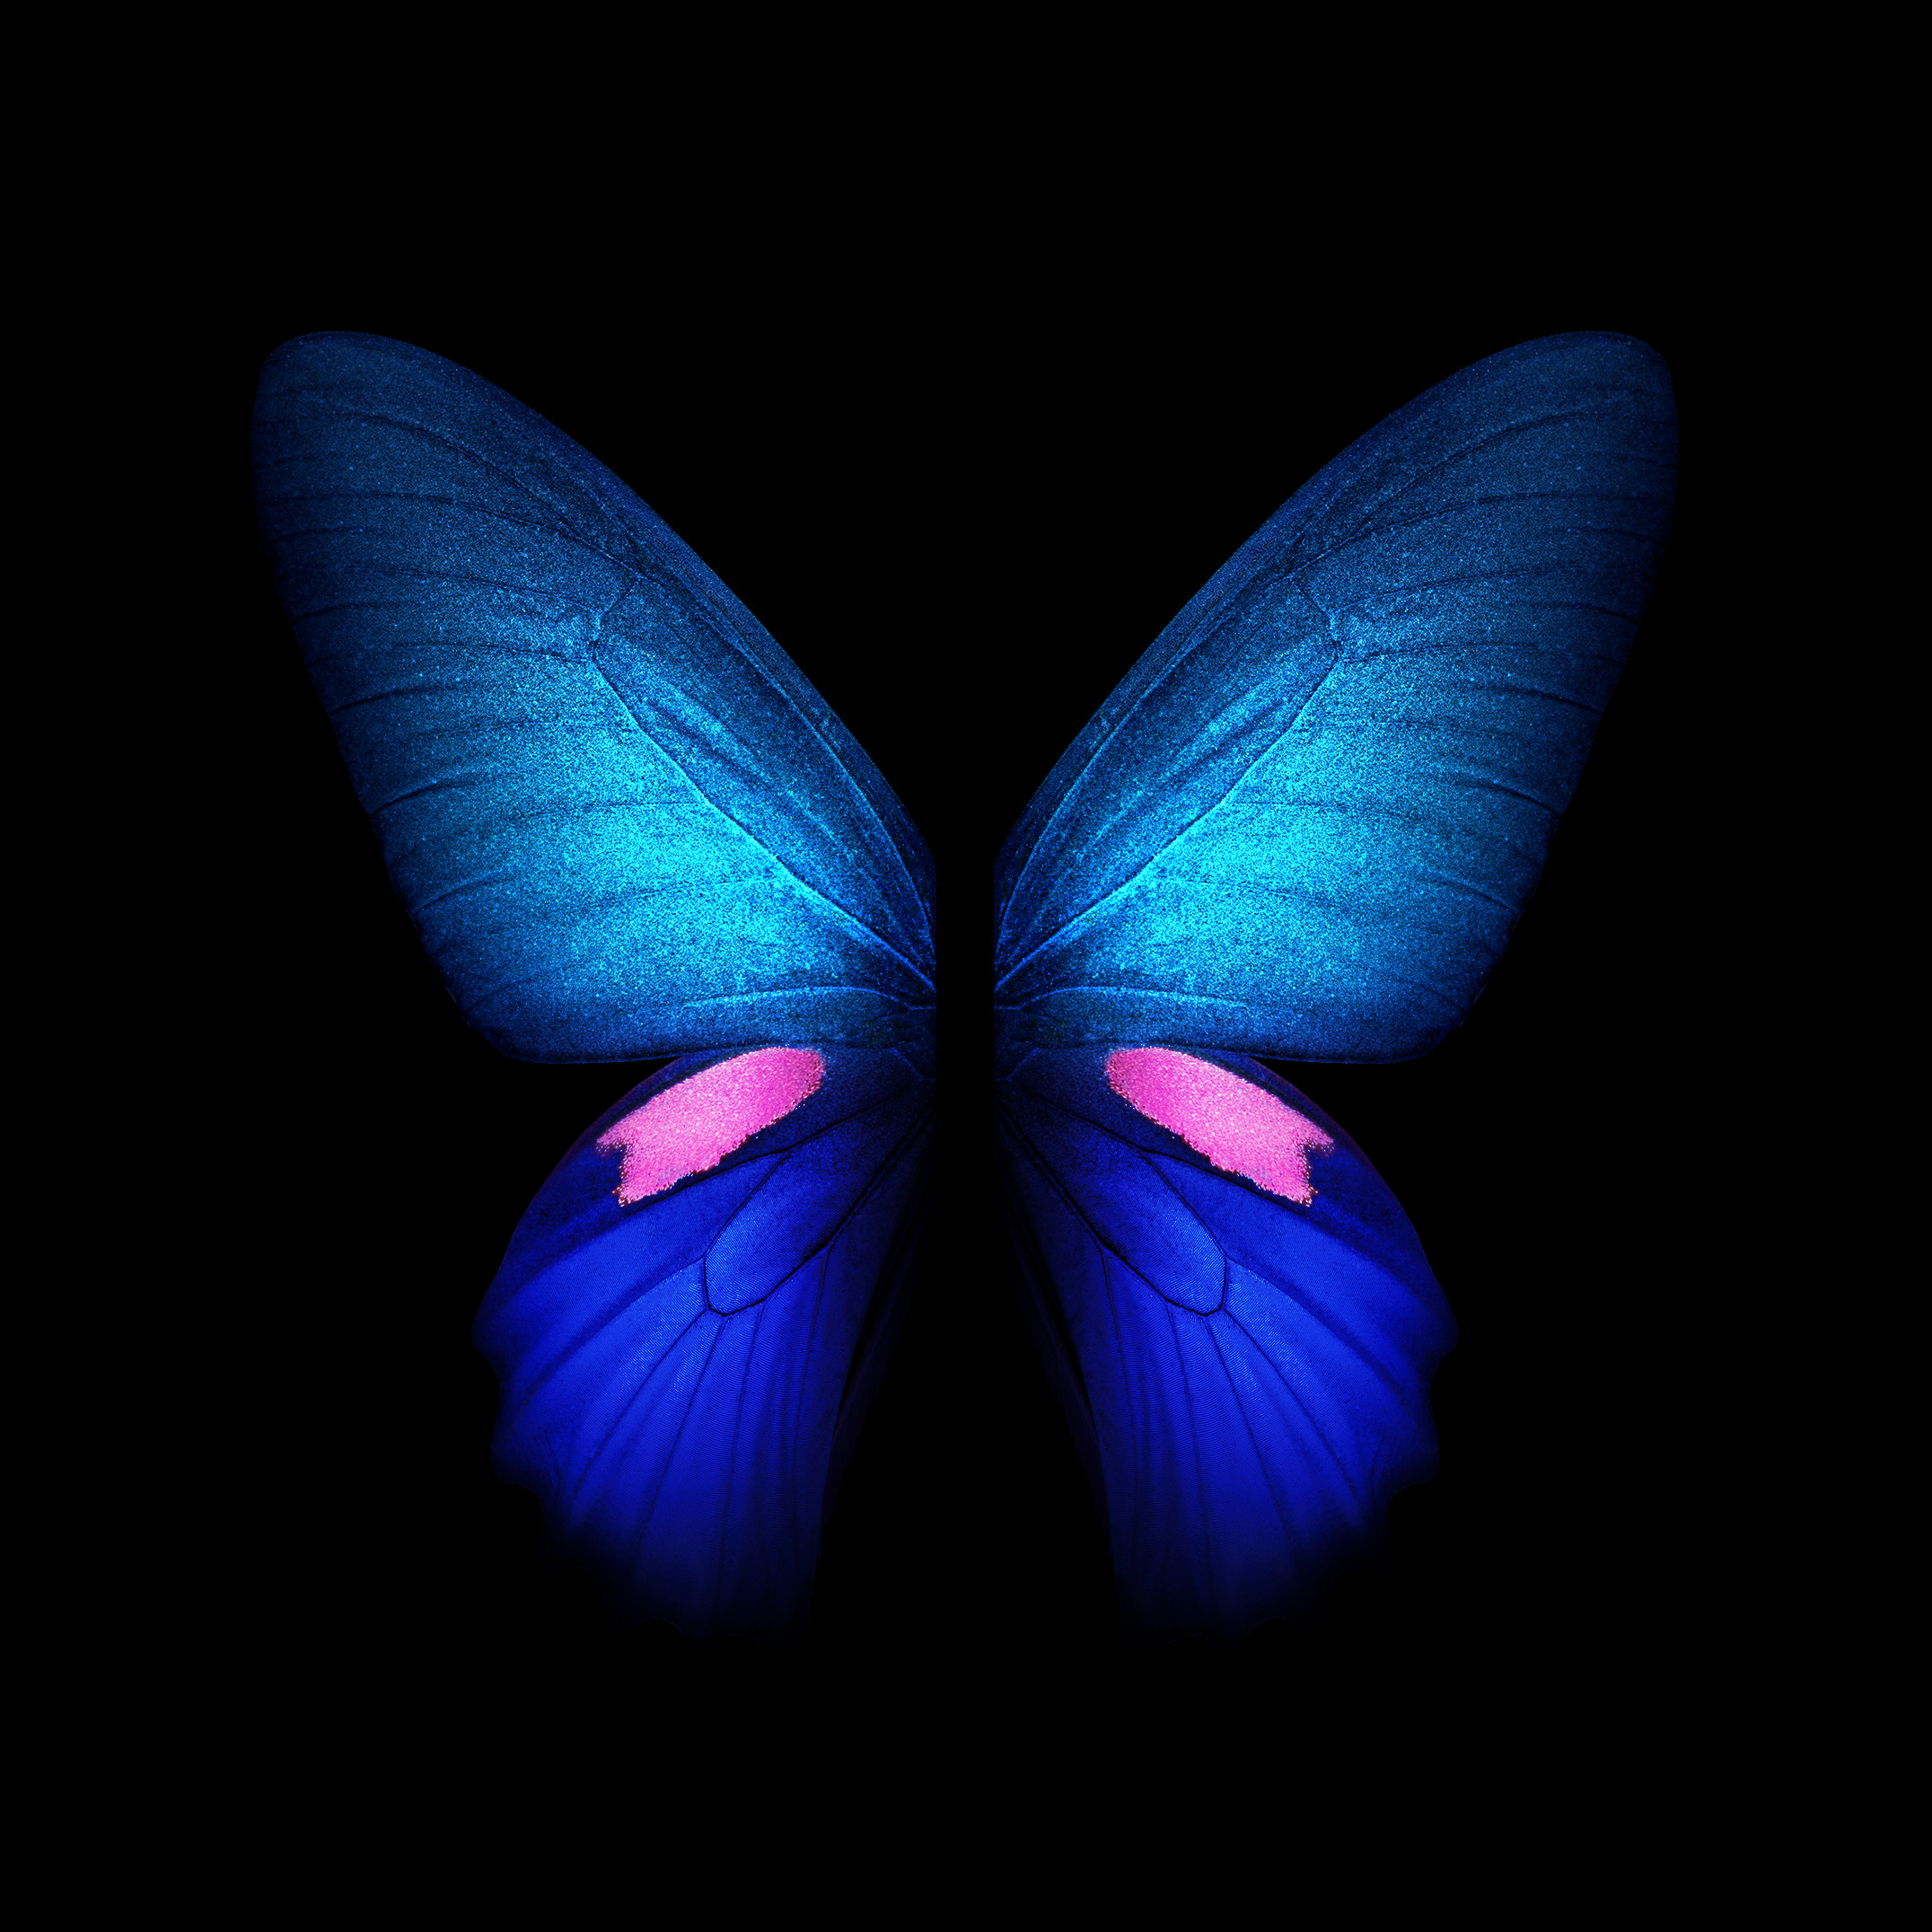 Samsung Galaxy Fold butterfly wallpaper in blue with two wings.